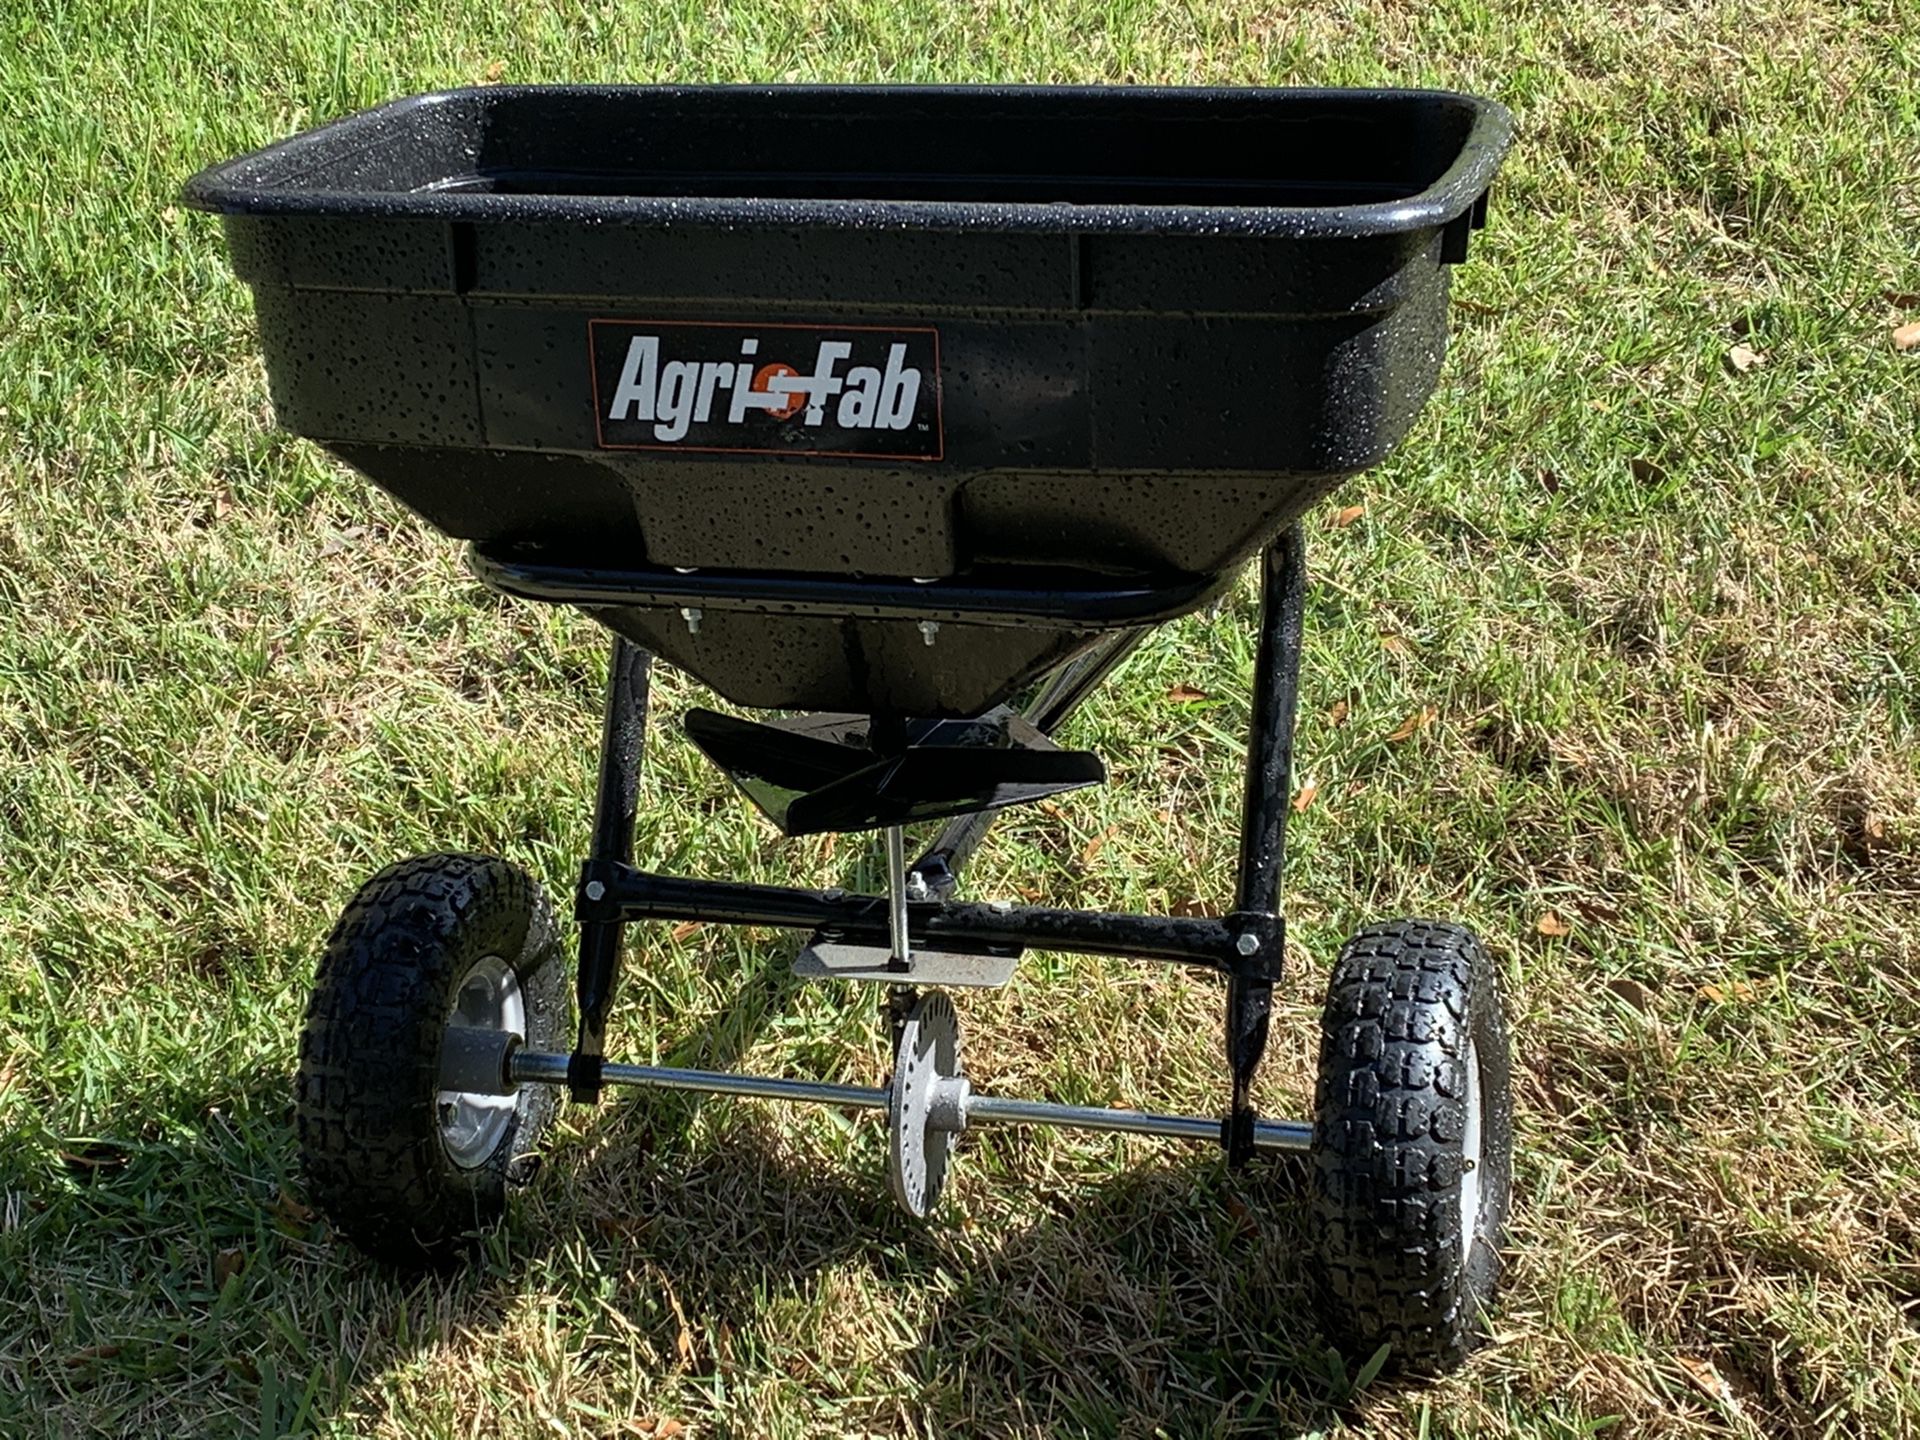 Agri-Fab Spreader for Riding Lawn Mower